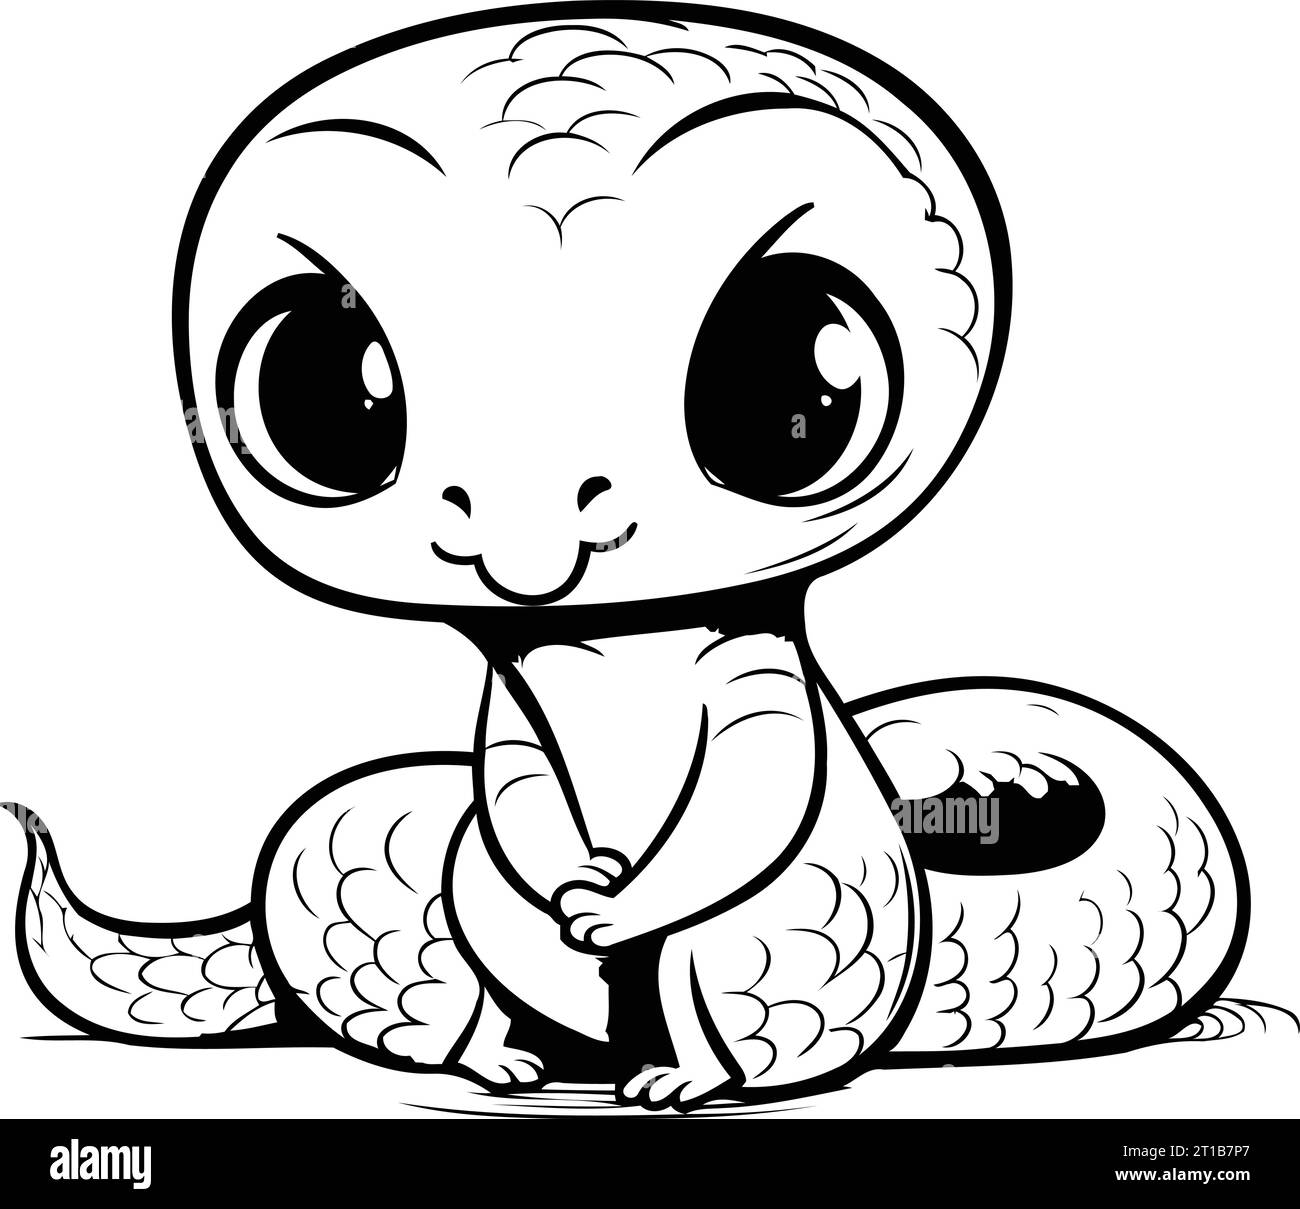 Cute cartoon snake isolated on a white background. Vector illustration. Stock Vector